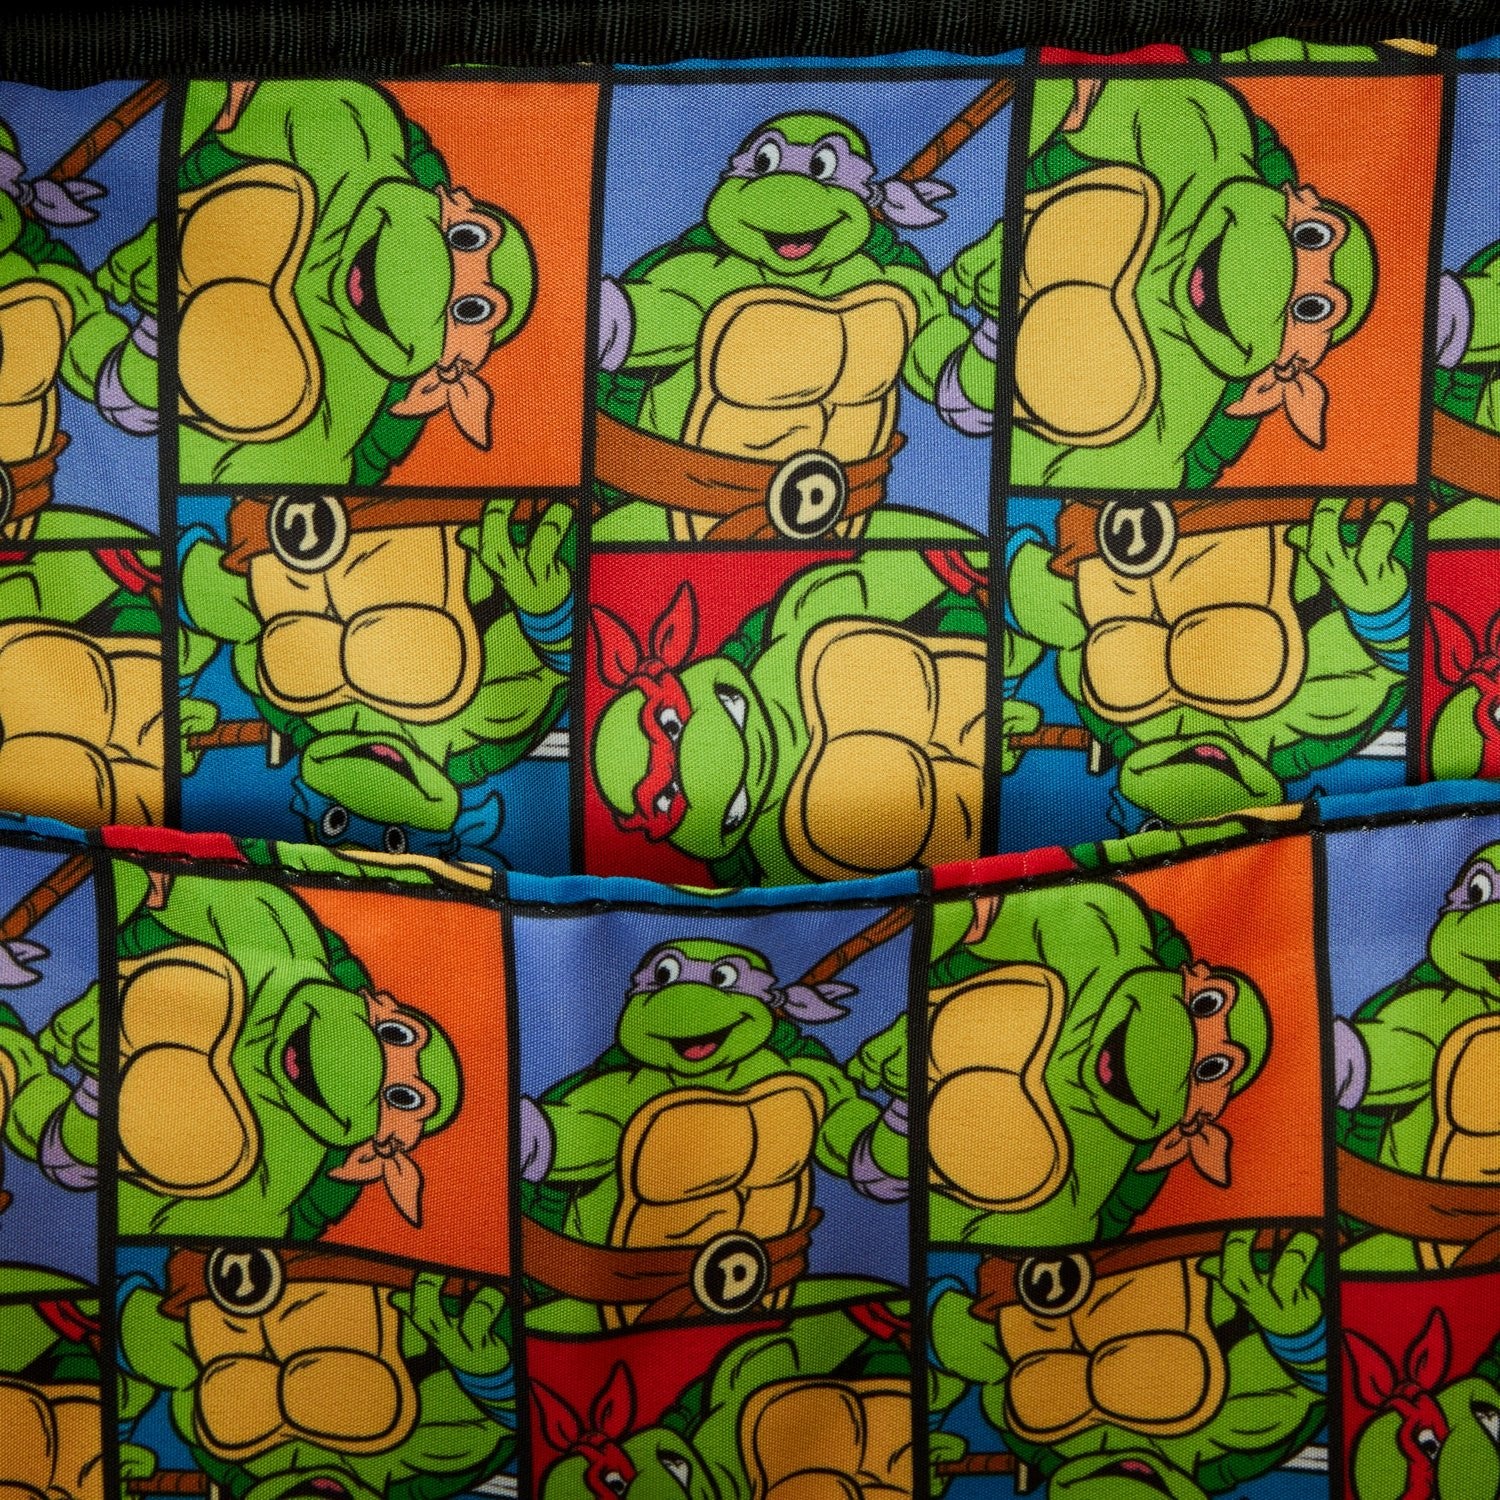 Loungefly x TMNT 40th Anniversary Vintage Arcade Mini Backpack - GeekCore